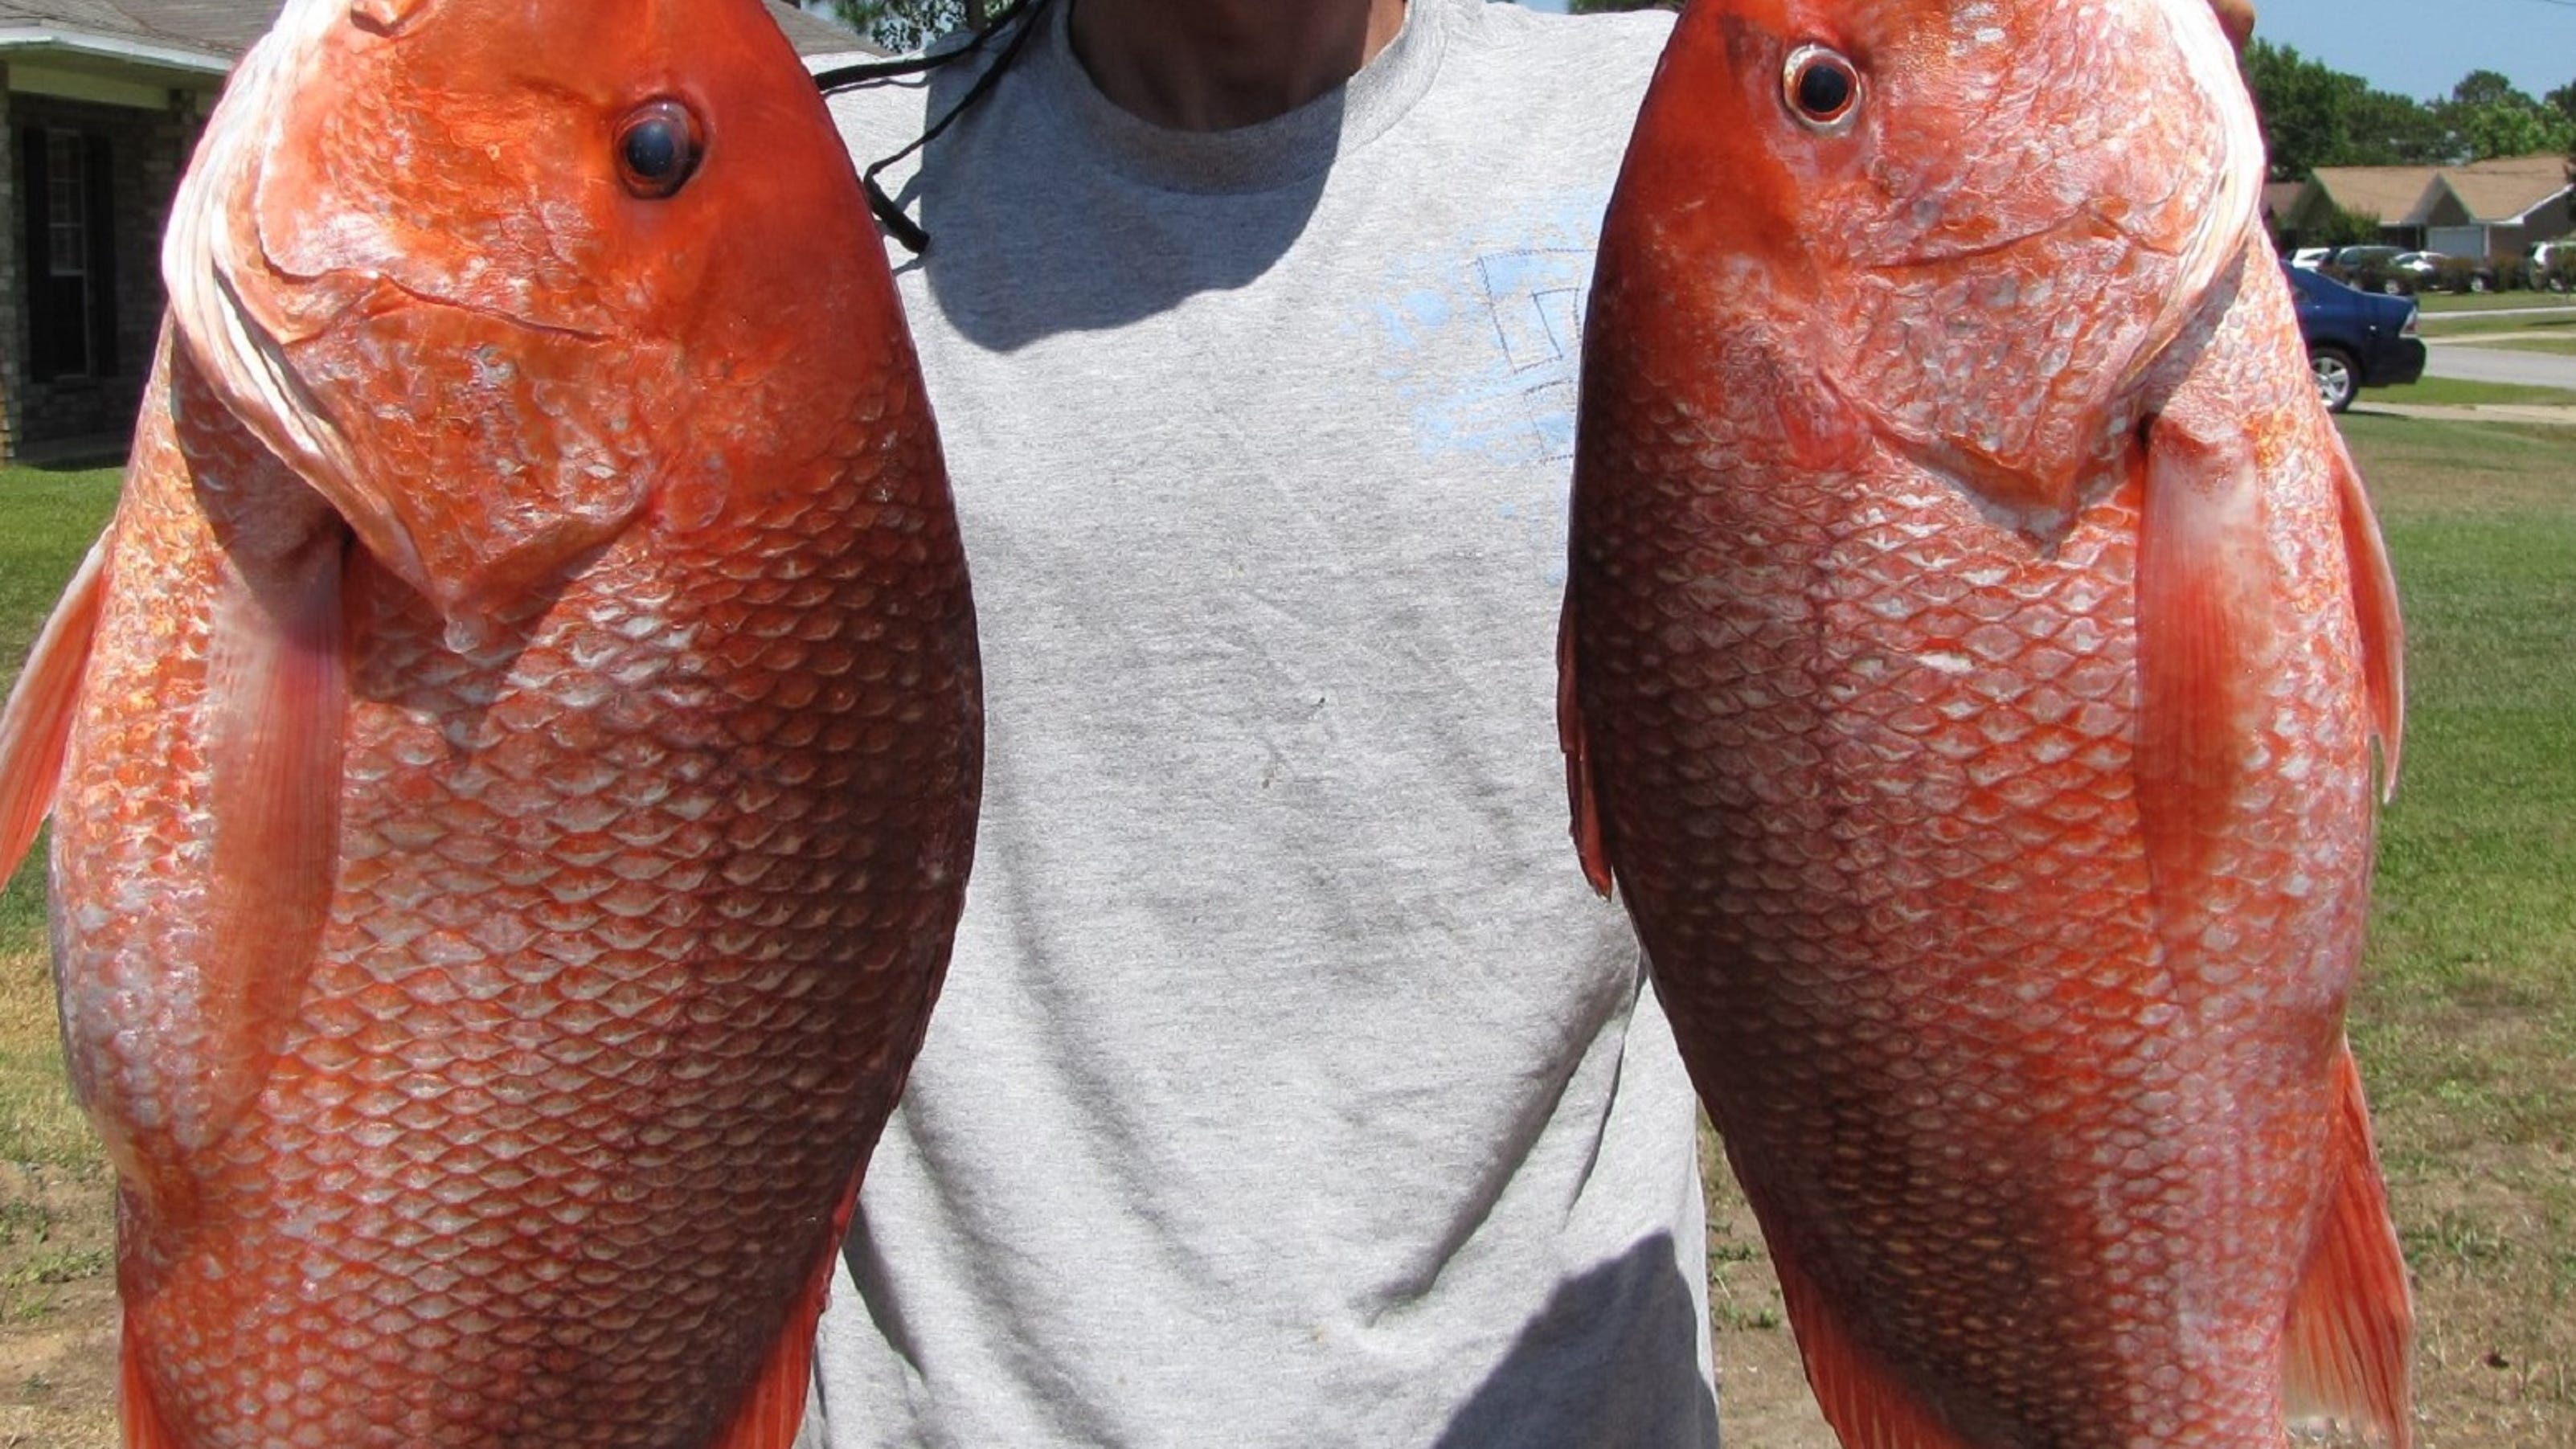 Red snapper season opens in state waters